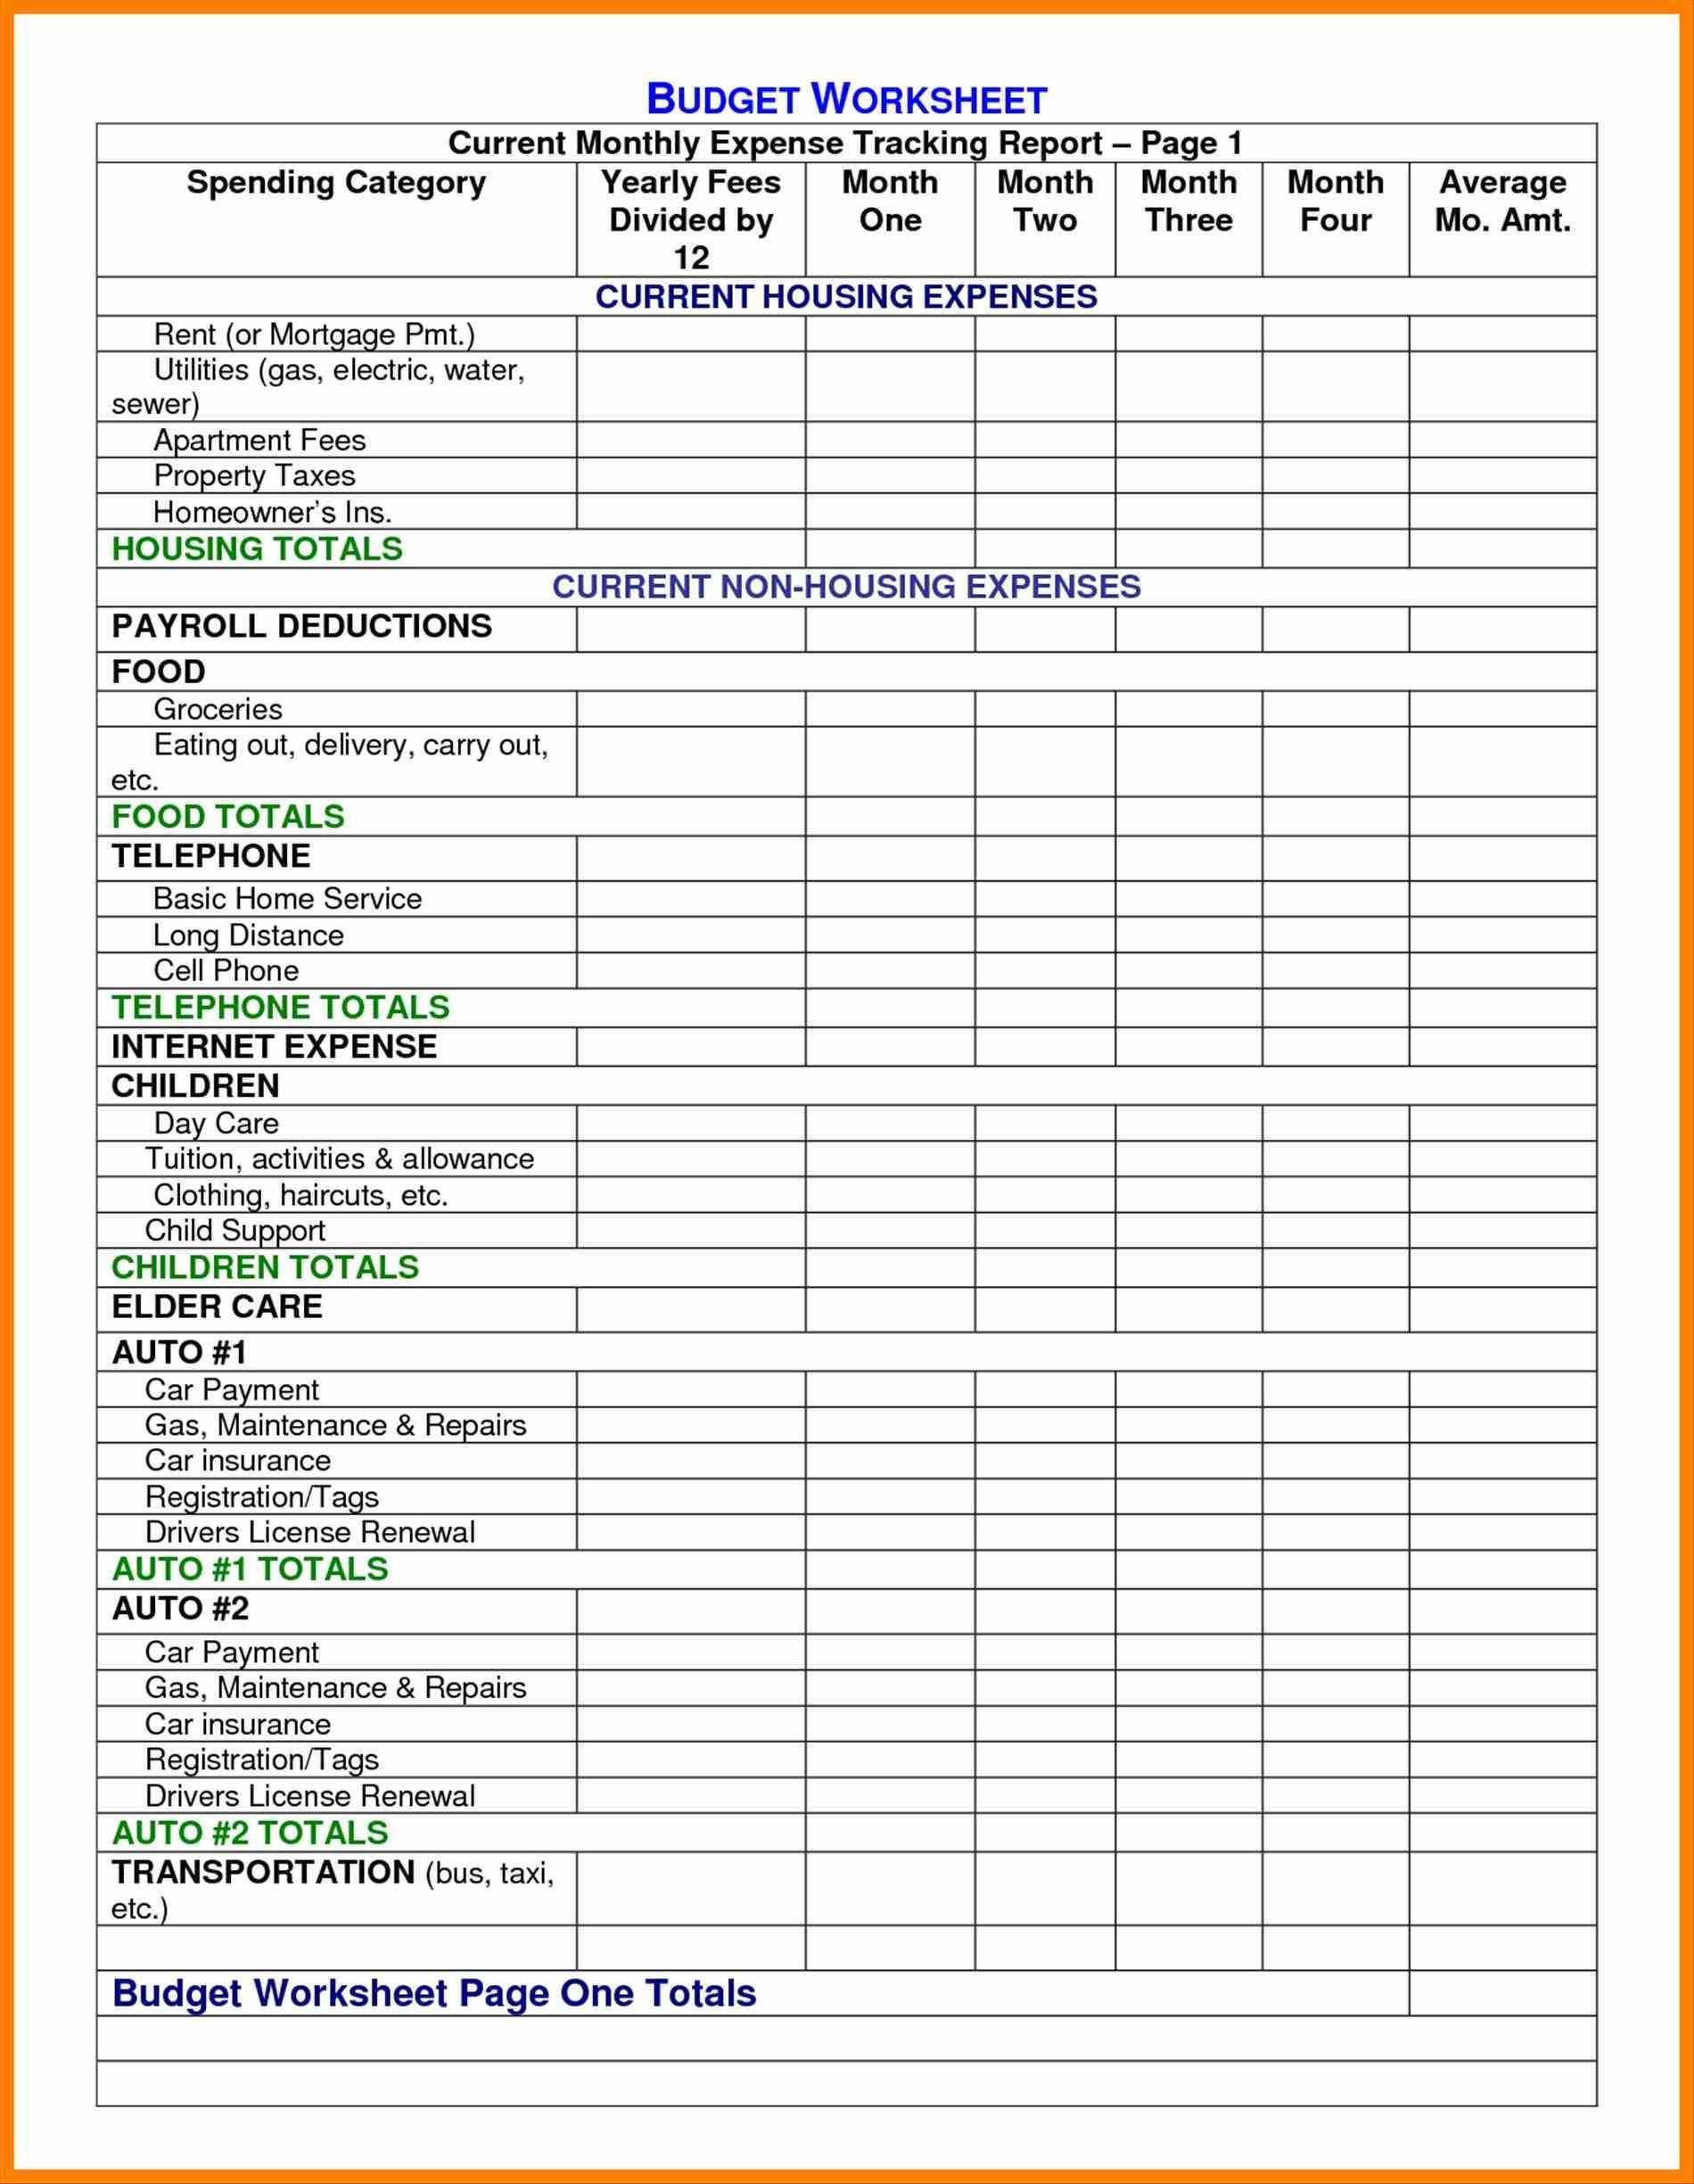 Business Budget Spreadsheet Excel intended for Free Business Expense Spreadsheet Invoice Template Excel For Small